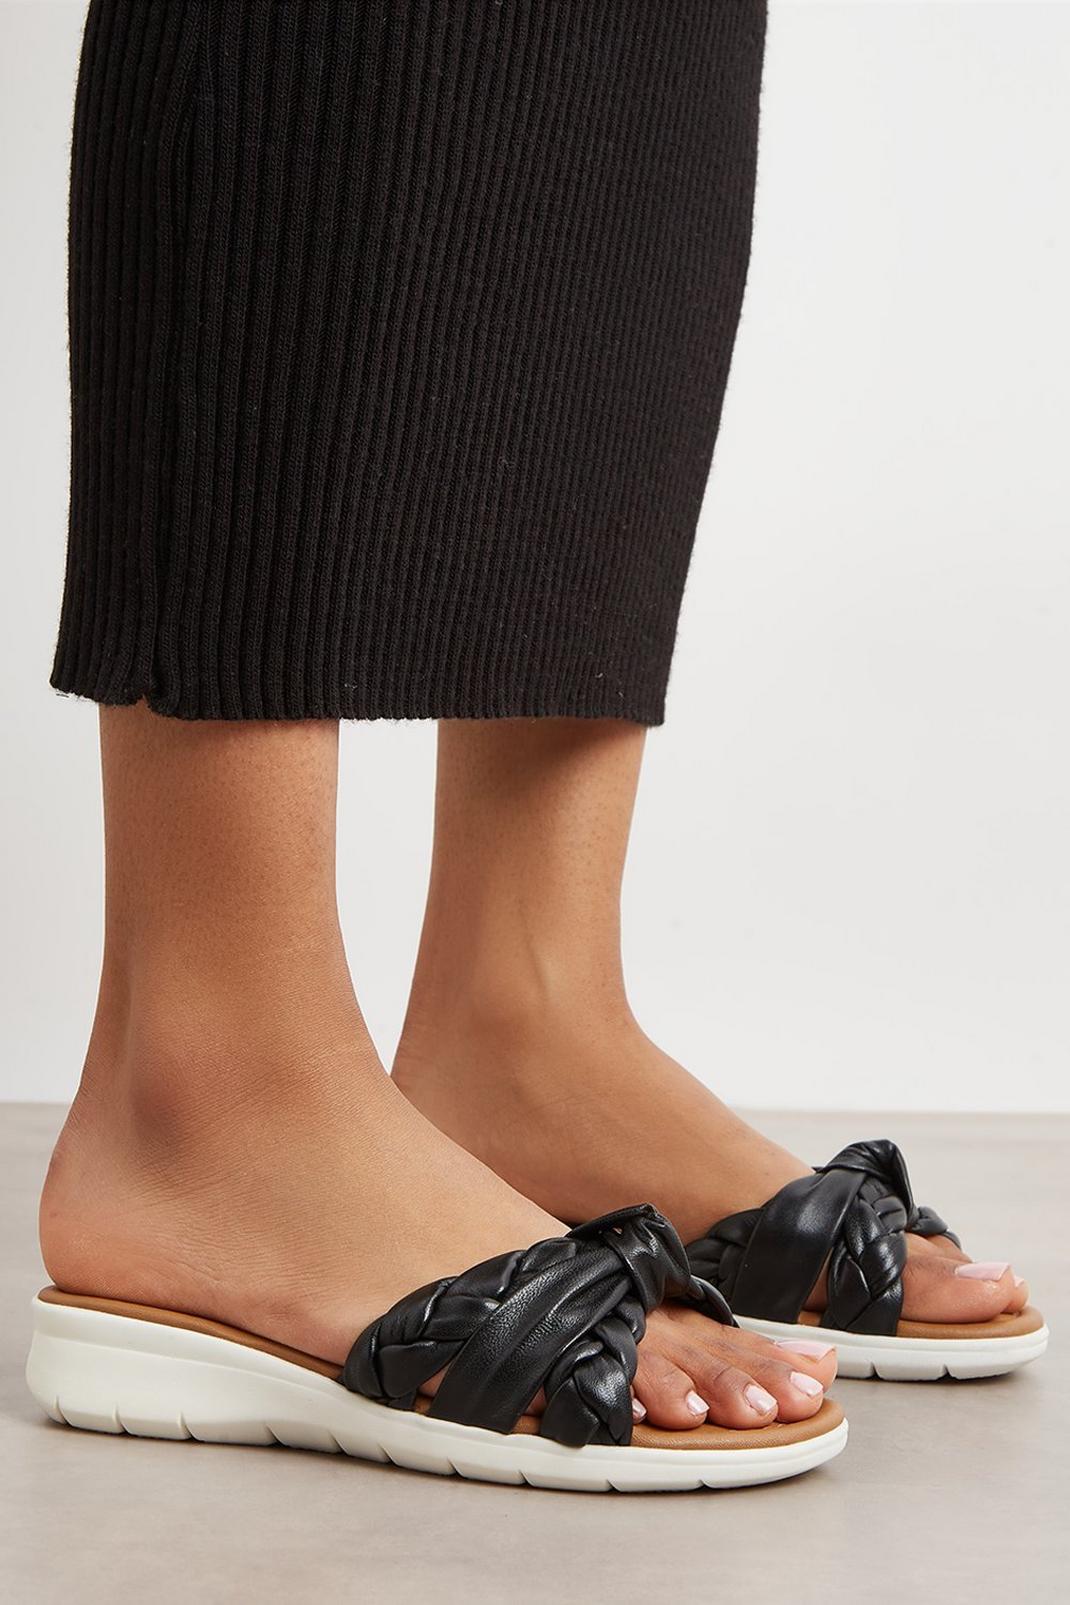 Black Good For The Sole: Skye Leather Wide Fit Flat Sandal image number 1